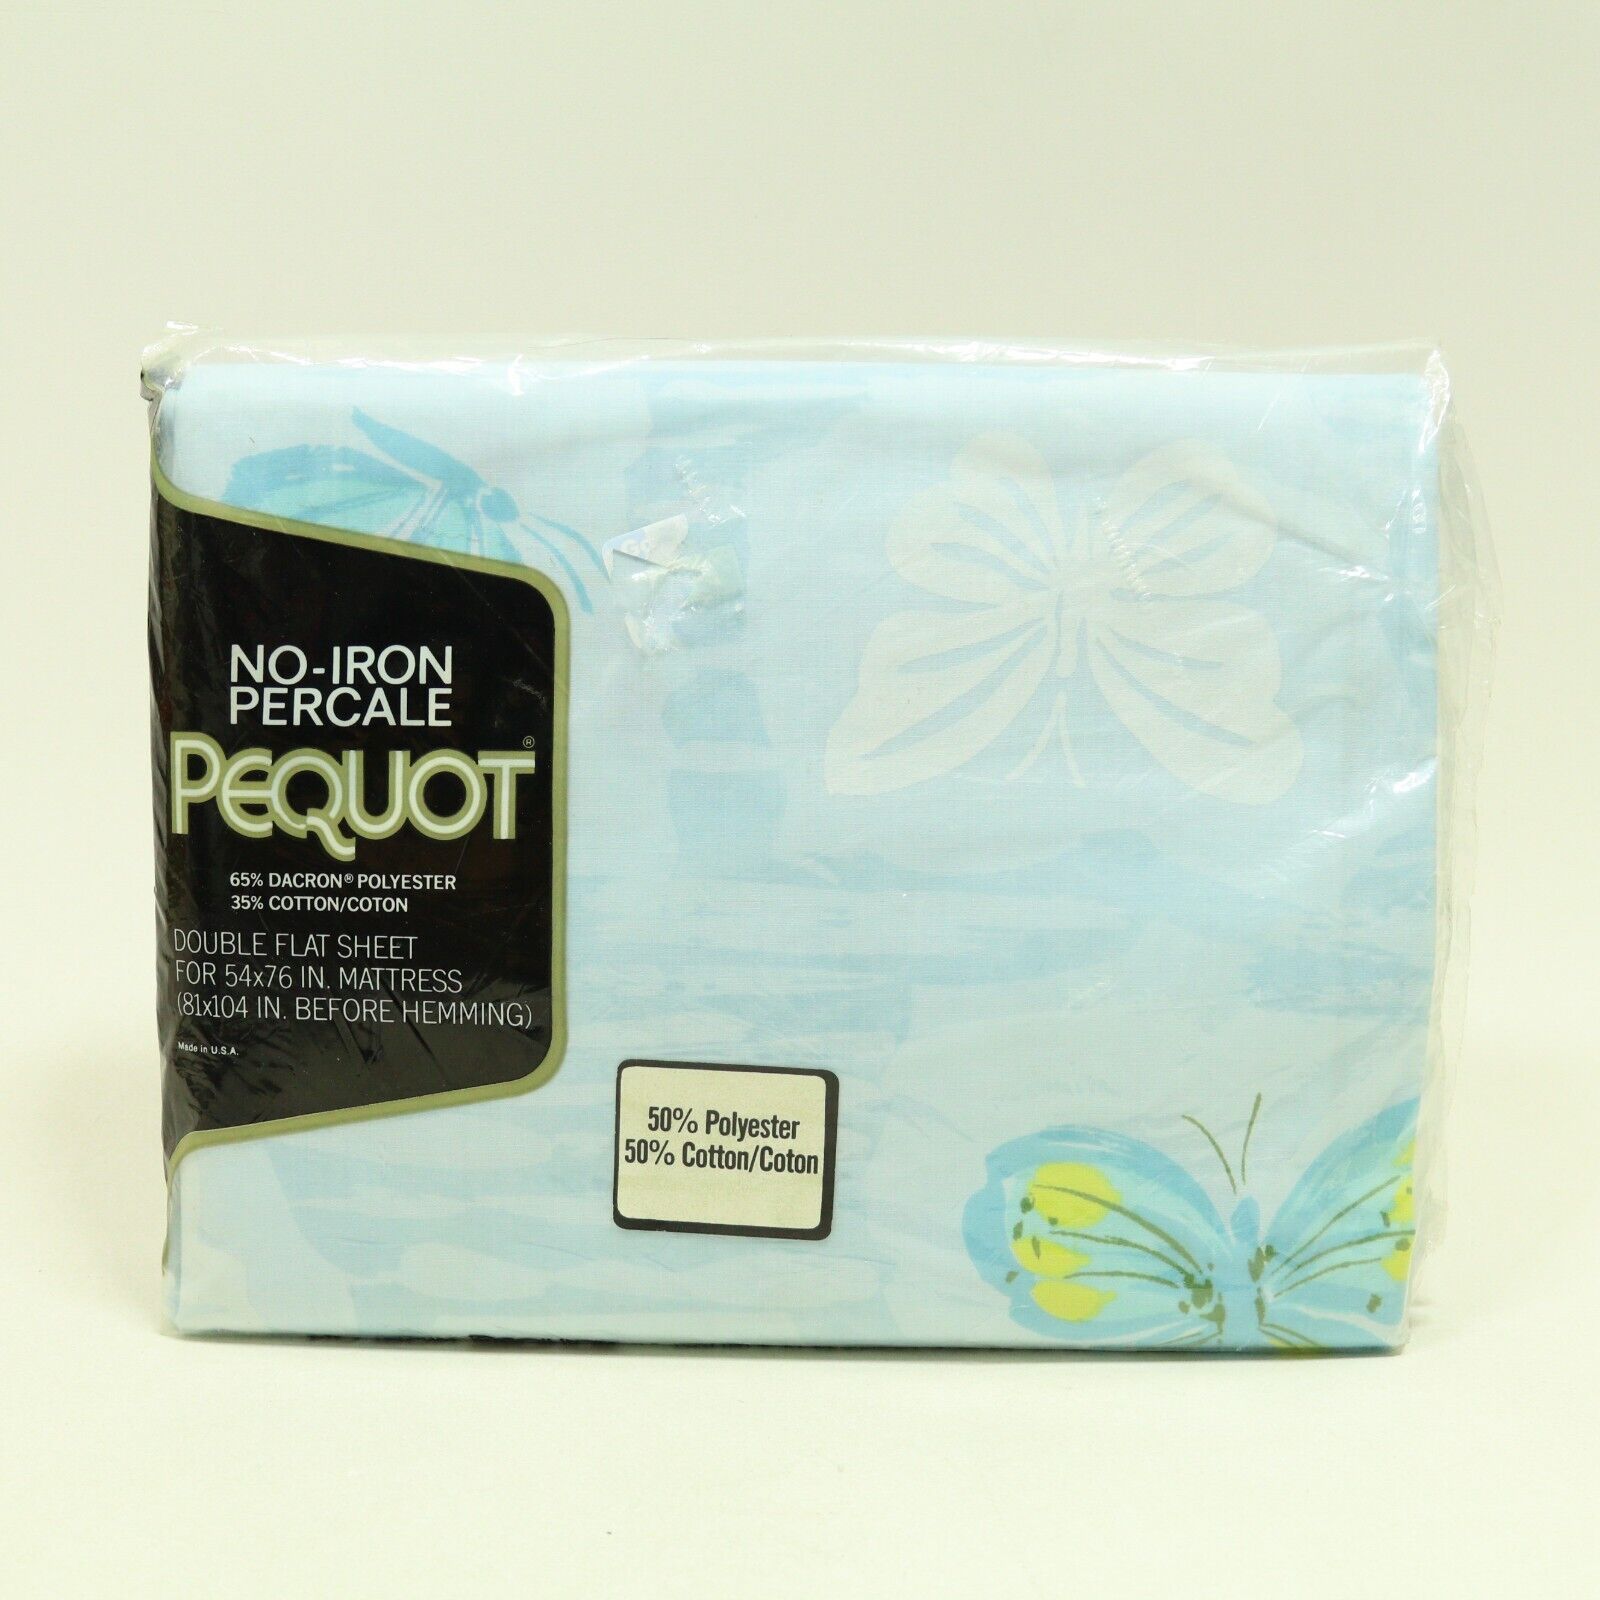 NOS Vintage PEQUOT Blue Butterfly FLUTTER-BUY Double Flat Bed Sheet NEW